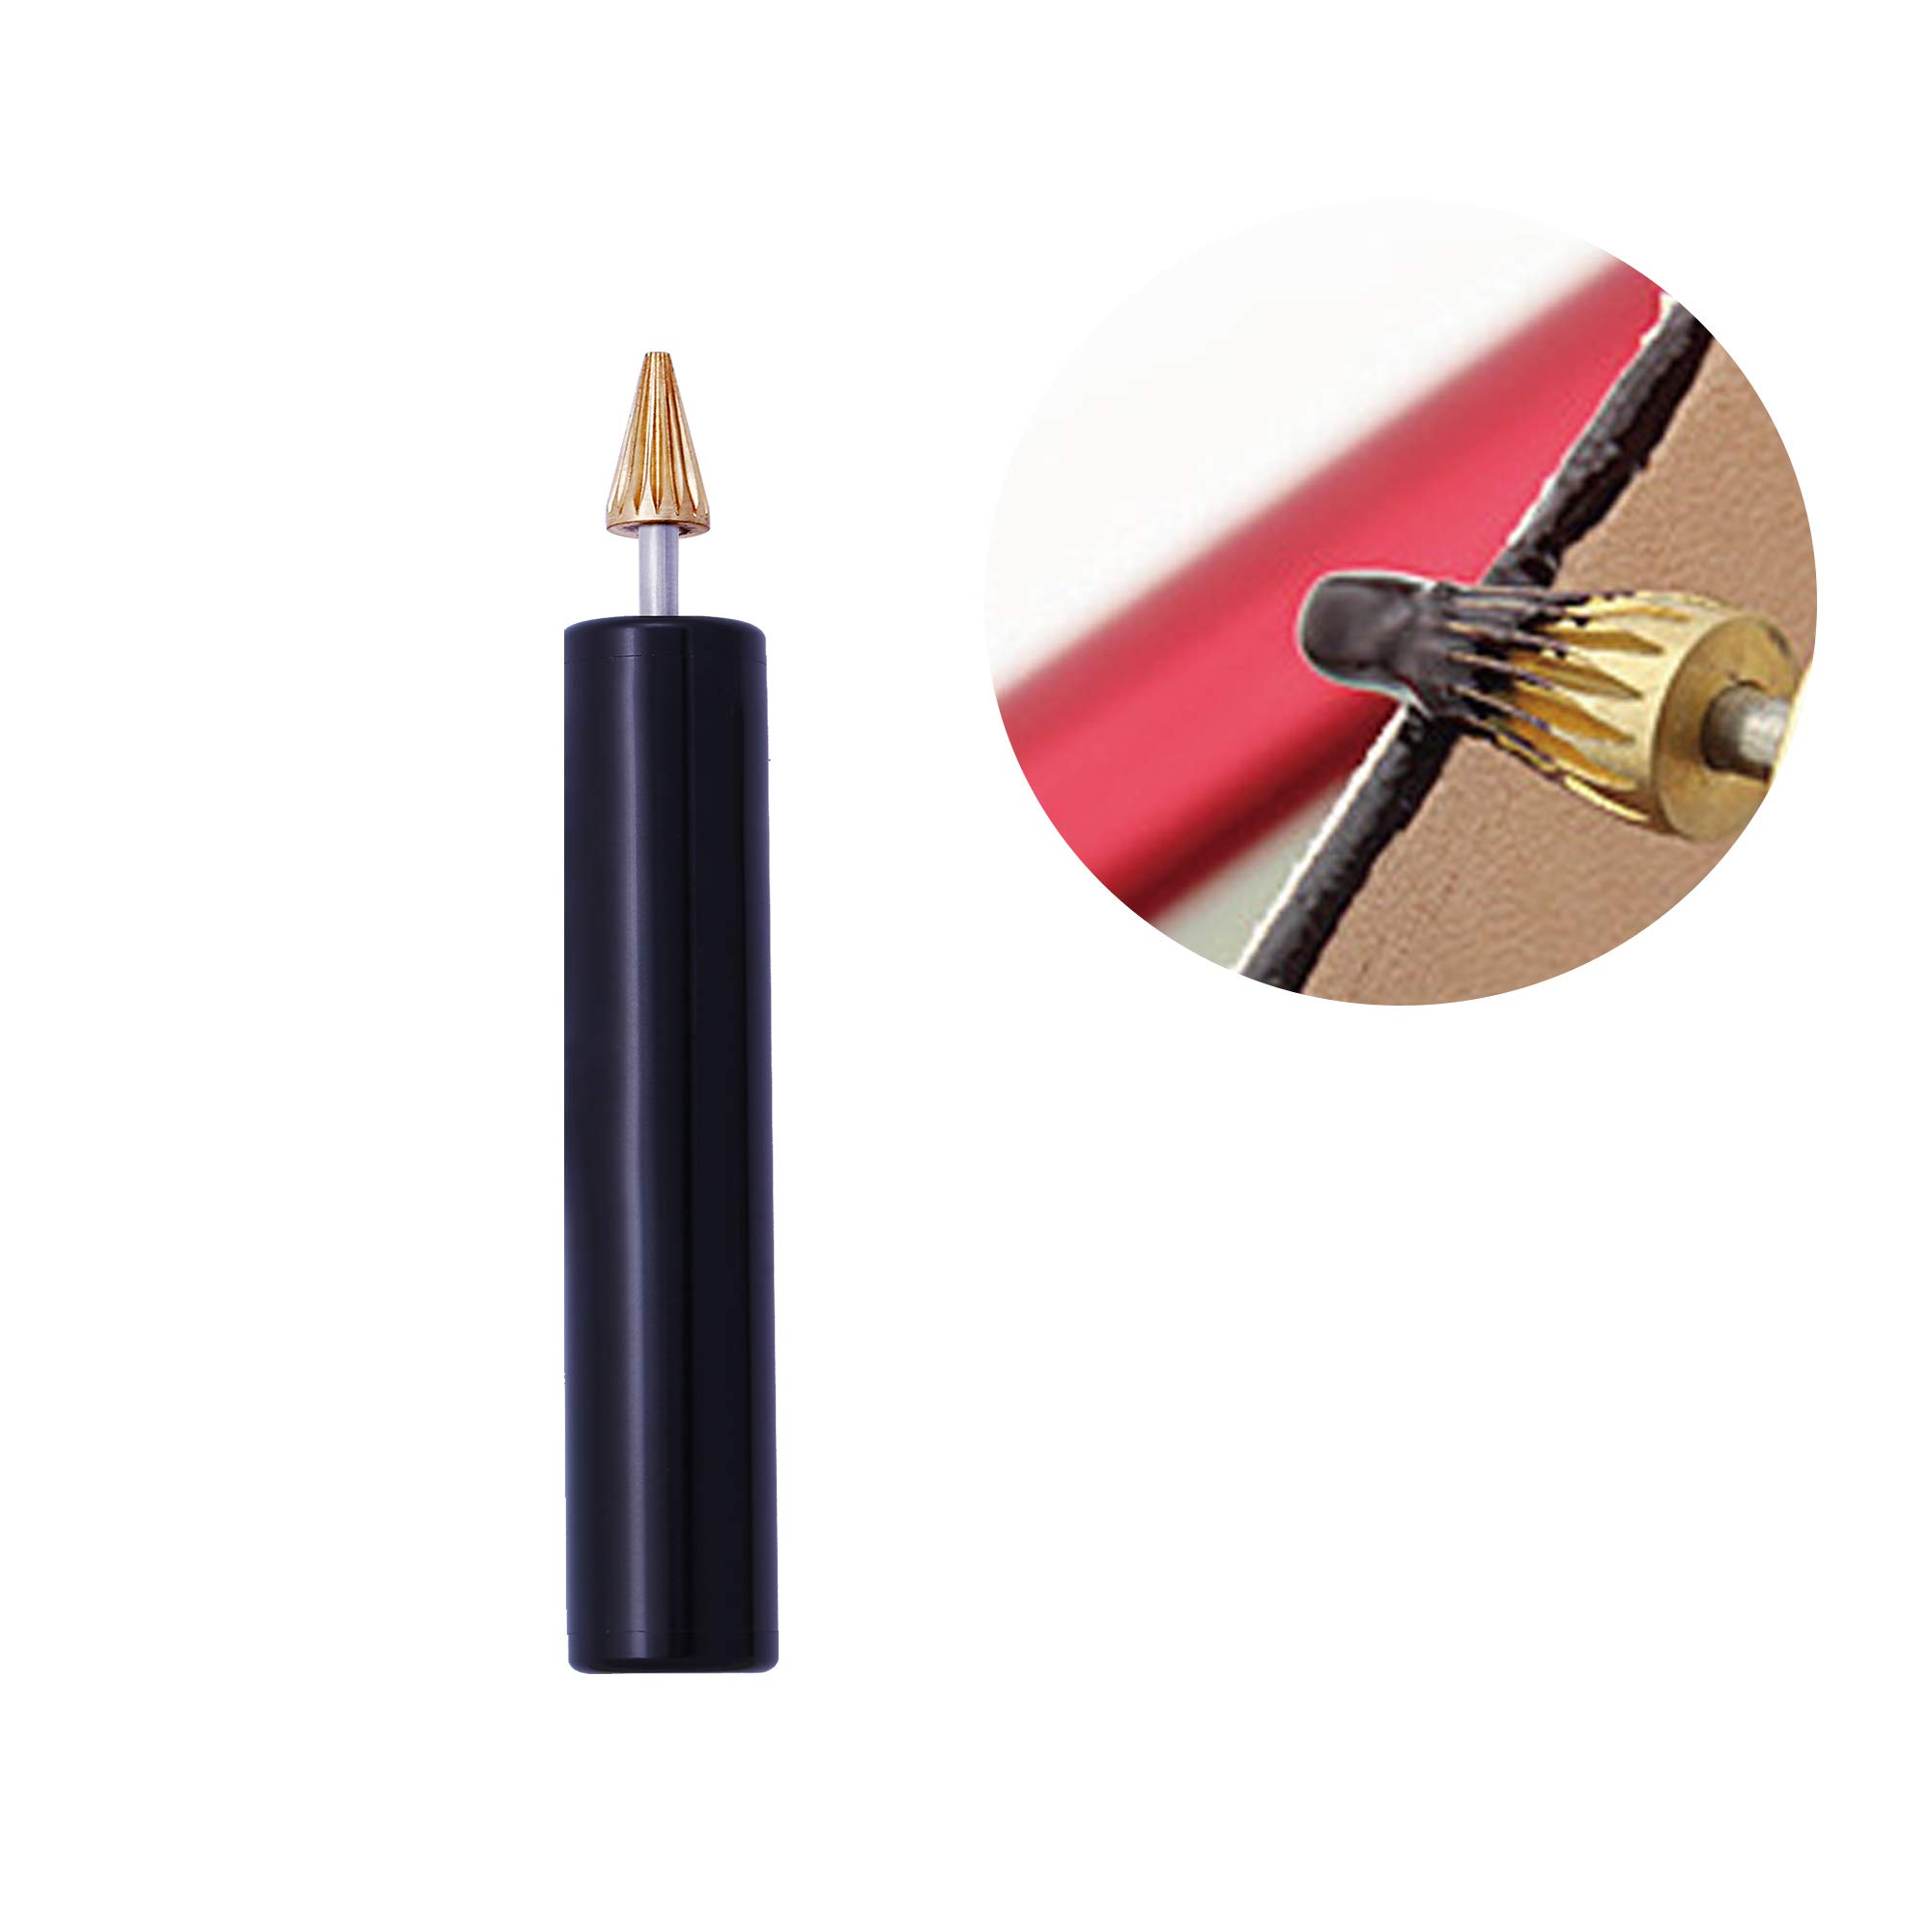 BUTUZE Convenient Leather Edge Dye Pen, Colorful Edge Roller Applicator,Essential Leather Edge Printing Tool for Leather Craft DIY,Leather Working,Leather Making